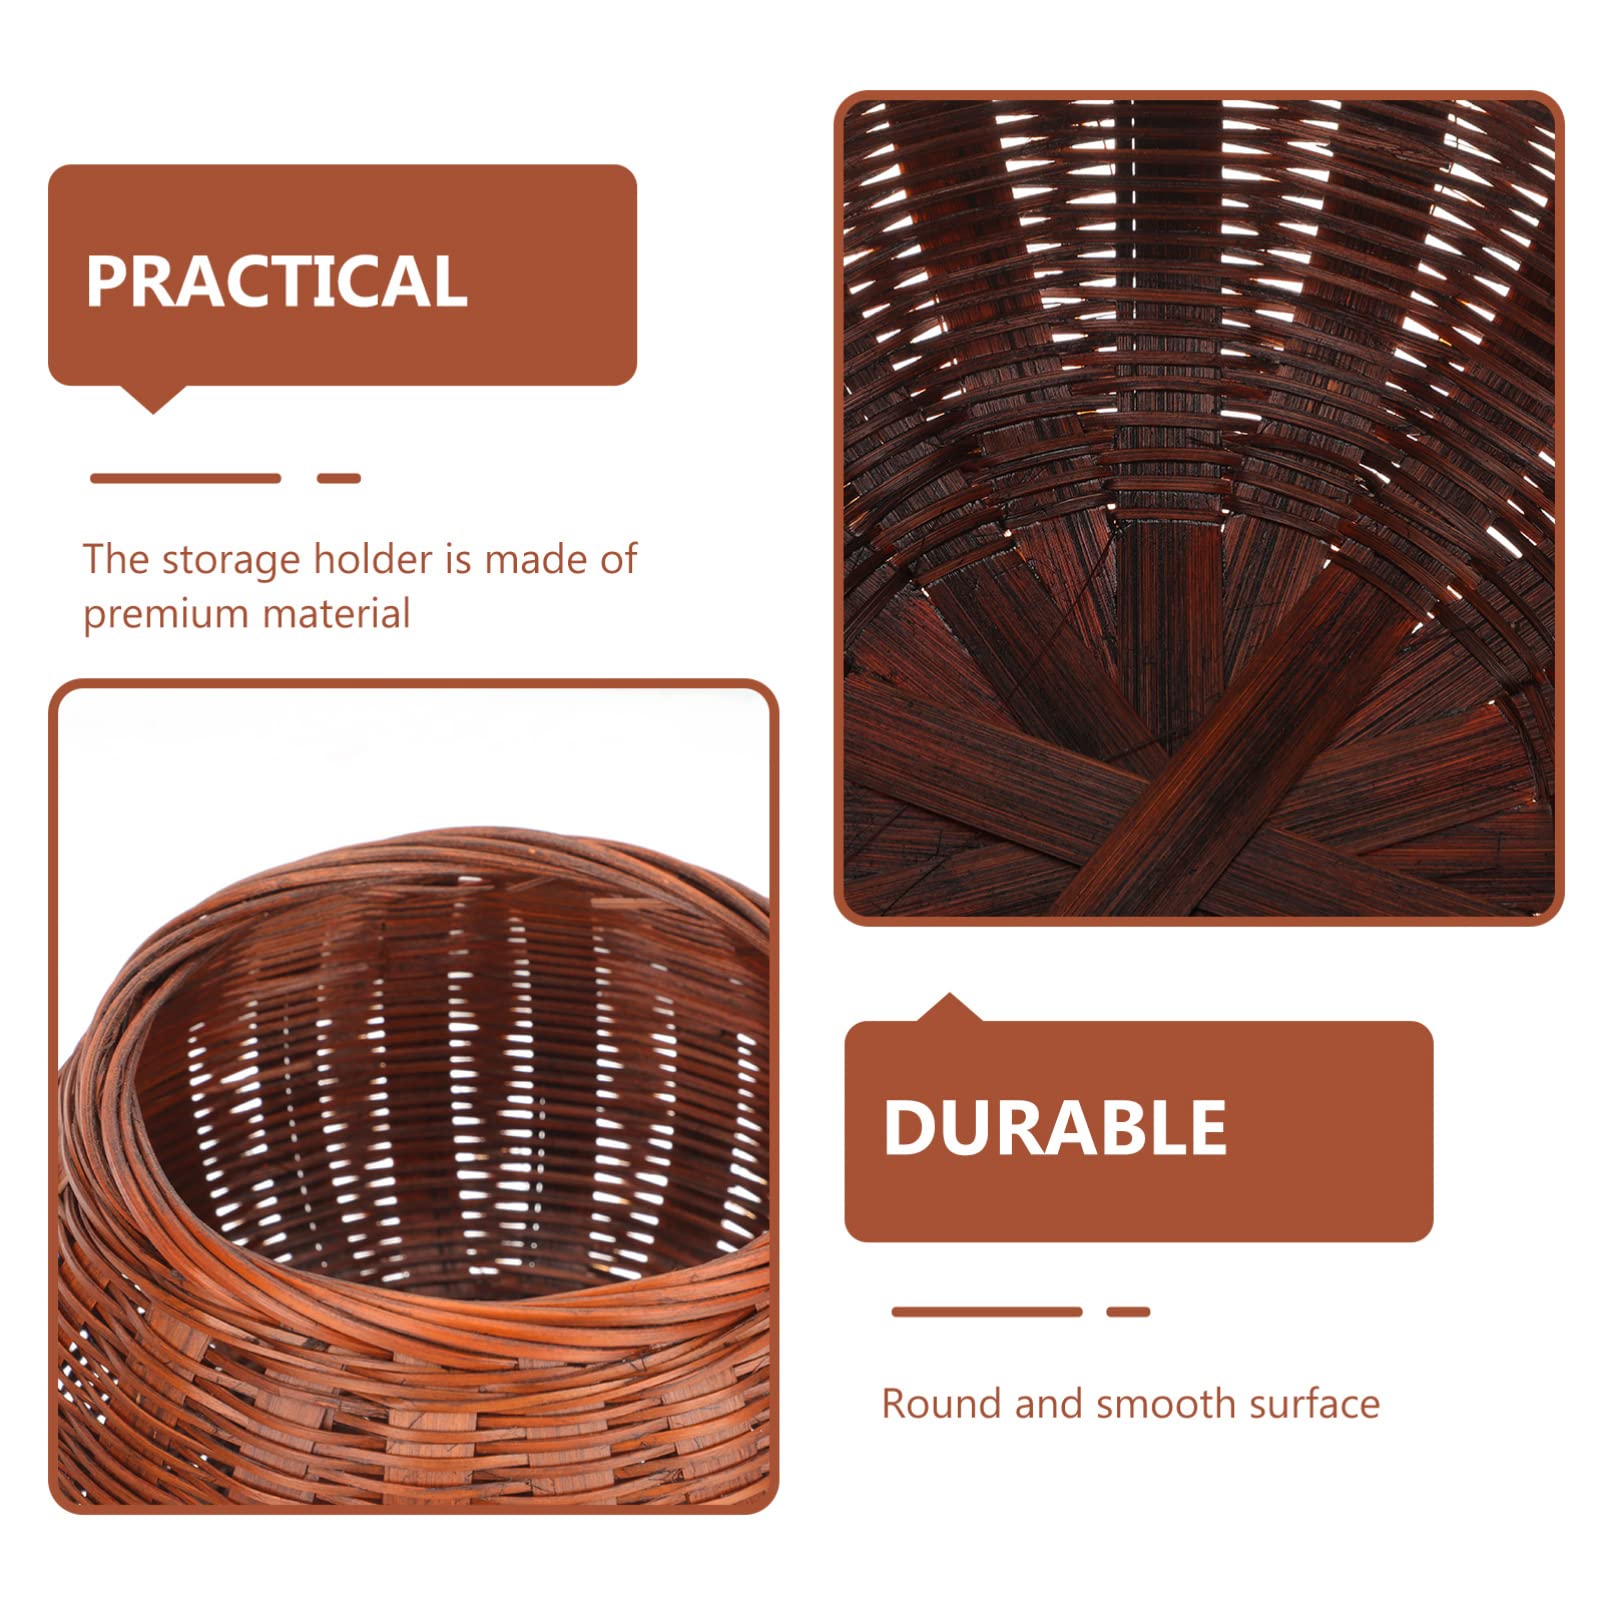 Cabilock Wicker Woven Basket Mini Rattan Storage Basket Pumpkin Shaped Round Rattan Boxes with Lid Hand- Woven Organizer Bin Pot Container for Snacks Gobang Chess Egg Fruit